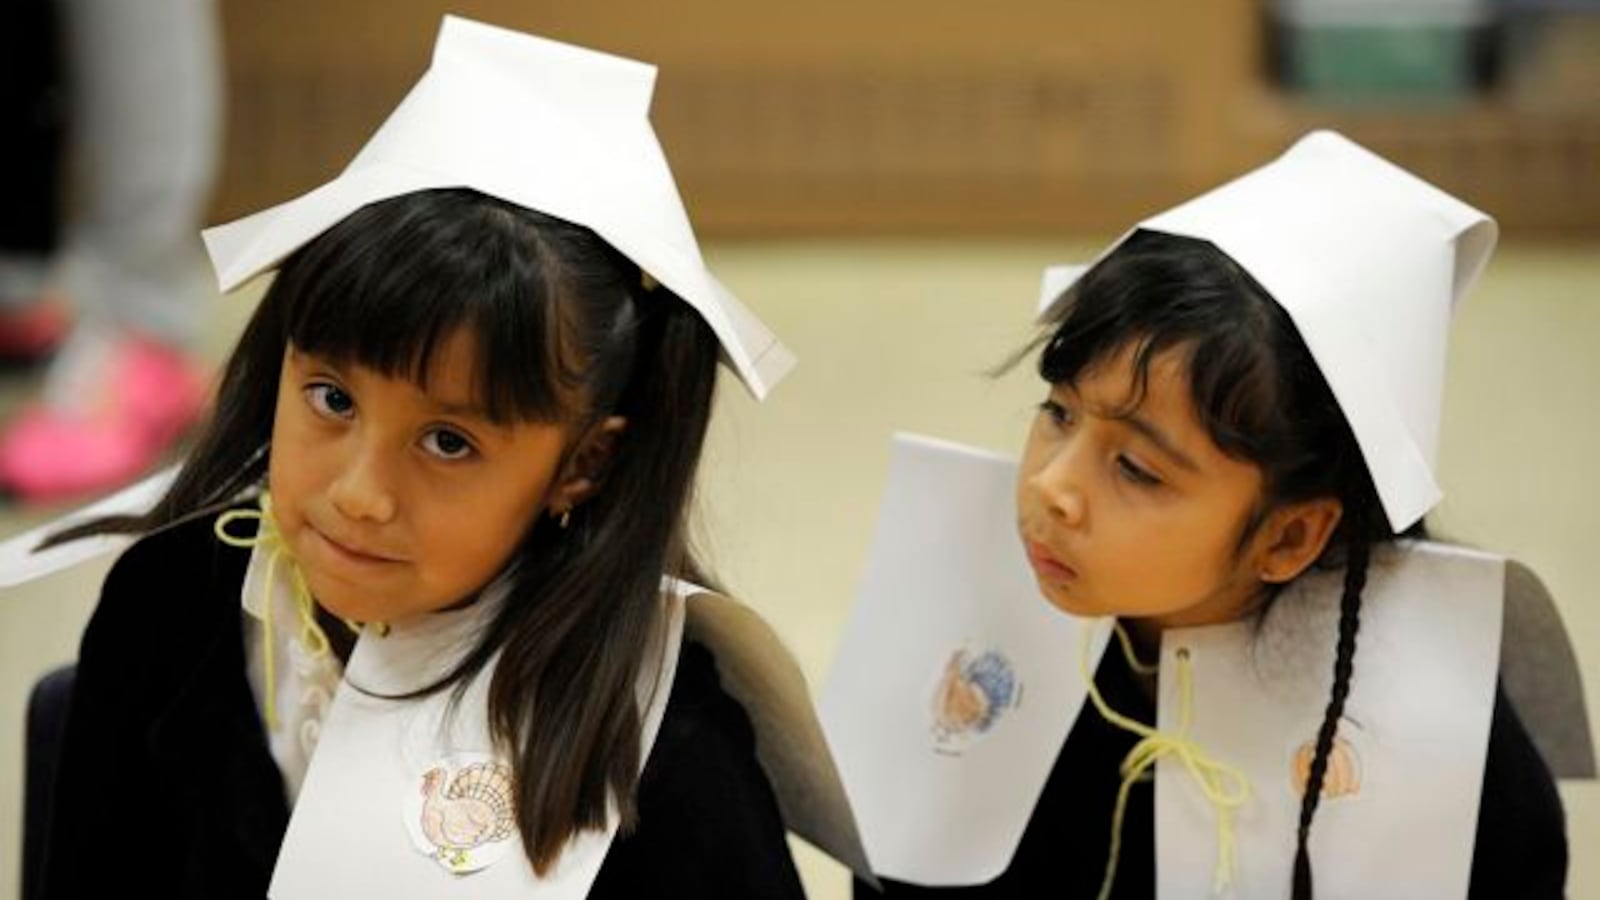 Indianapolis kindergartners dressed for a Thanksgiving feast